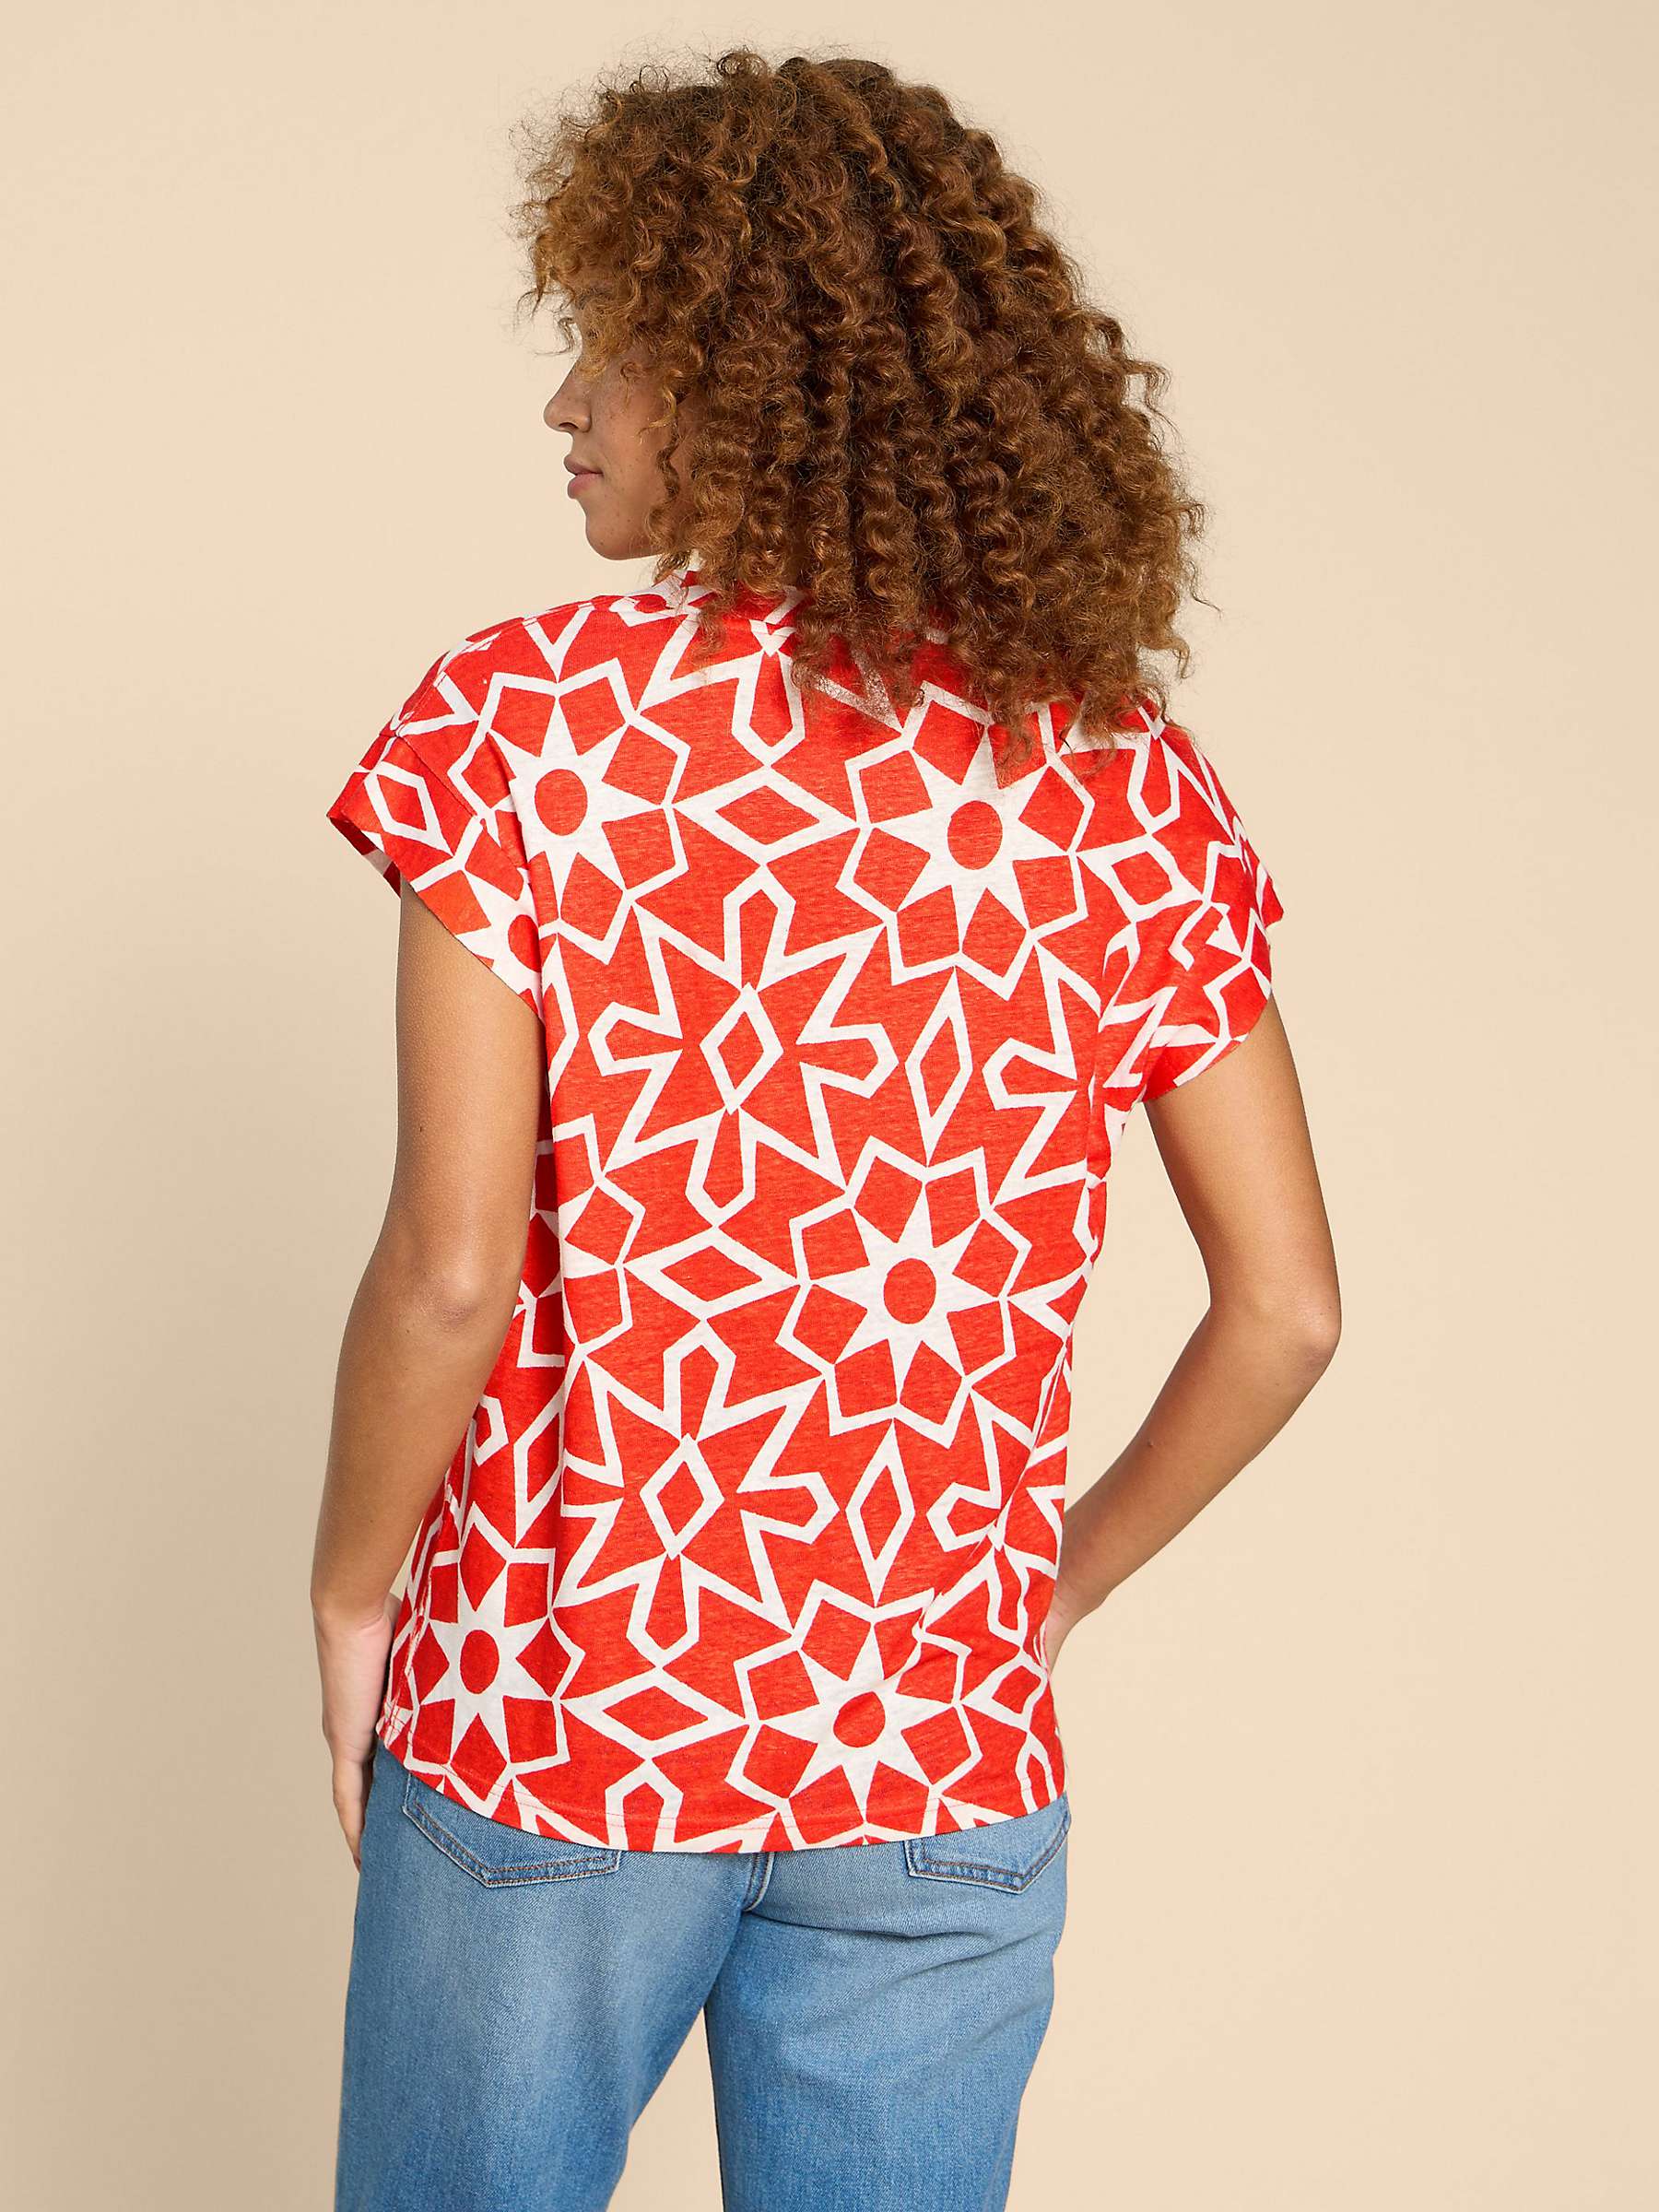 Buy White Stuff Ivy Abstract Print Linen T-Shirt, Red Online at johnlewis.com